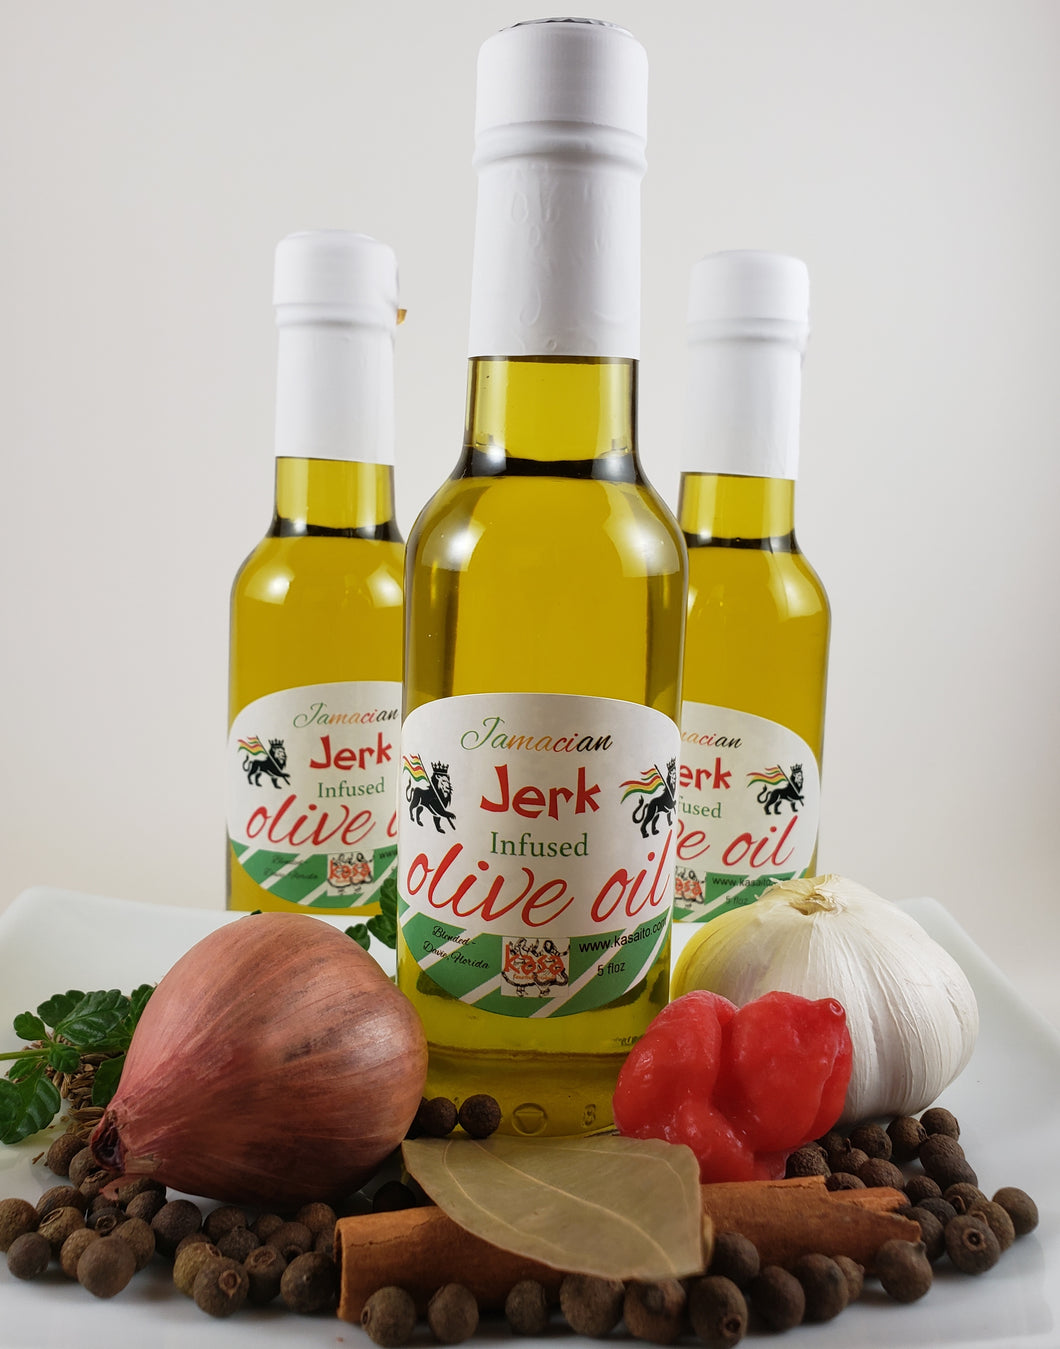 Our Jamaican Jerk Seasoning Marinade adds just the right amount of heat and spice to this marinade for any meat or seafood dish Jerk Seasoning Oil Jamaican Jerk Olive Oil or Jamaica Jerk Marinade Dipping Olive Oil